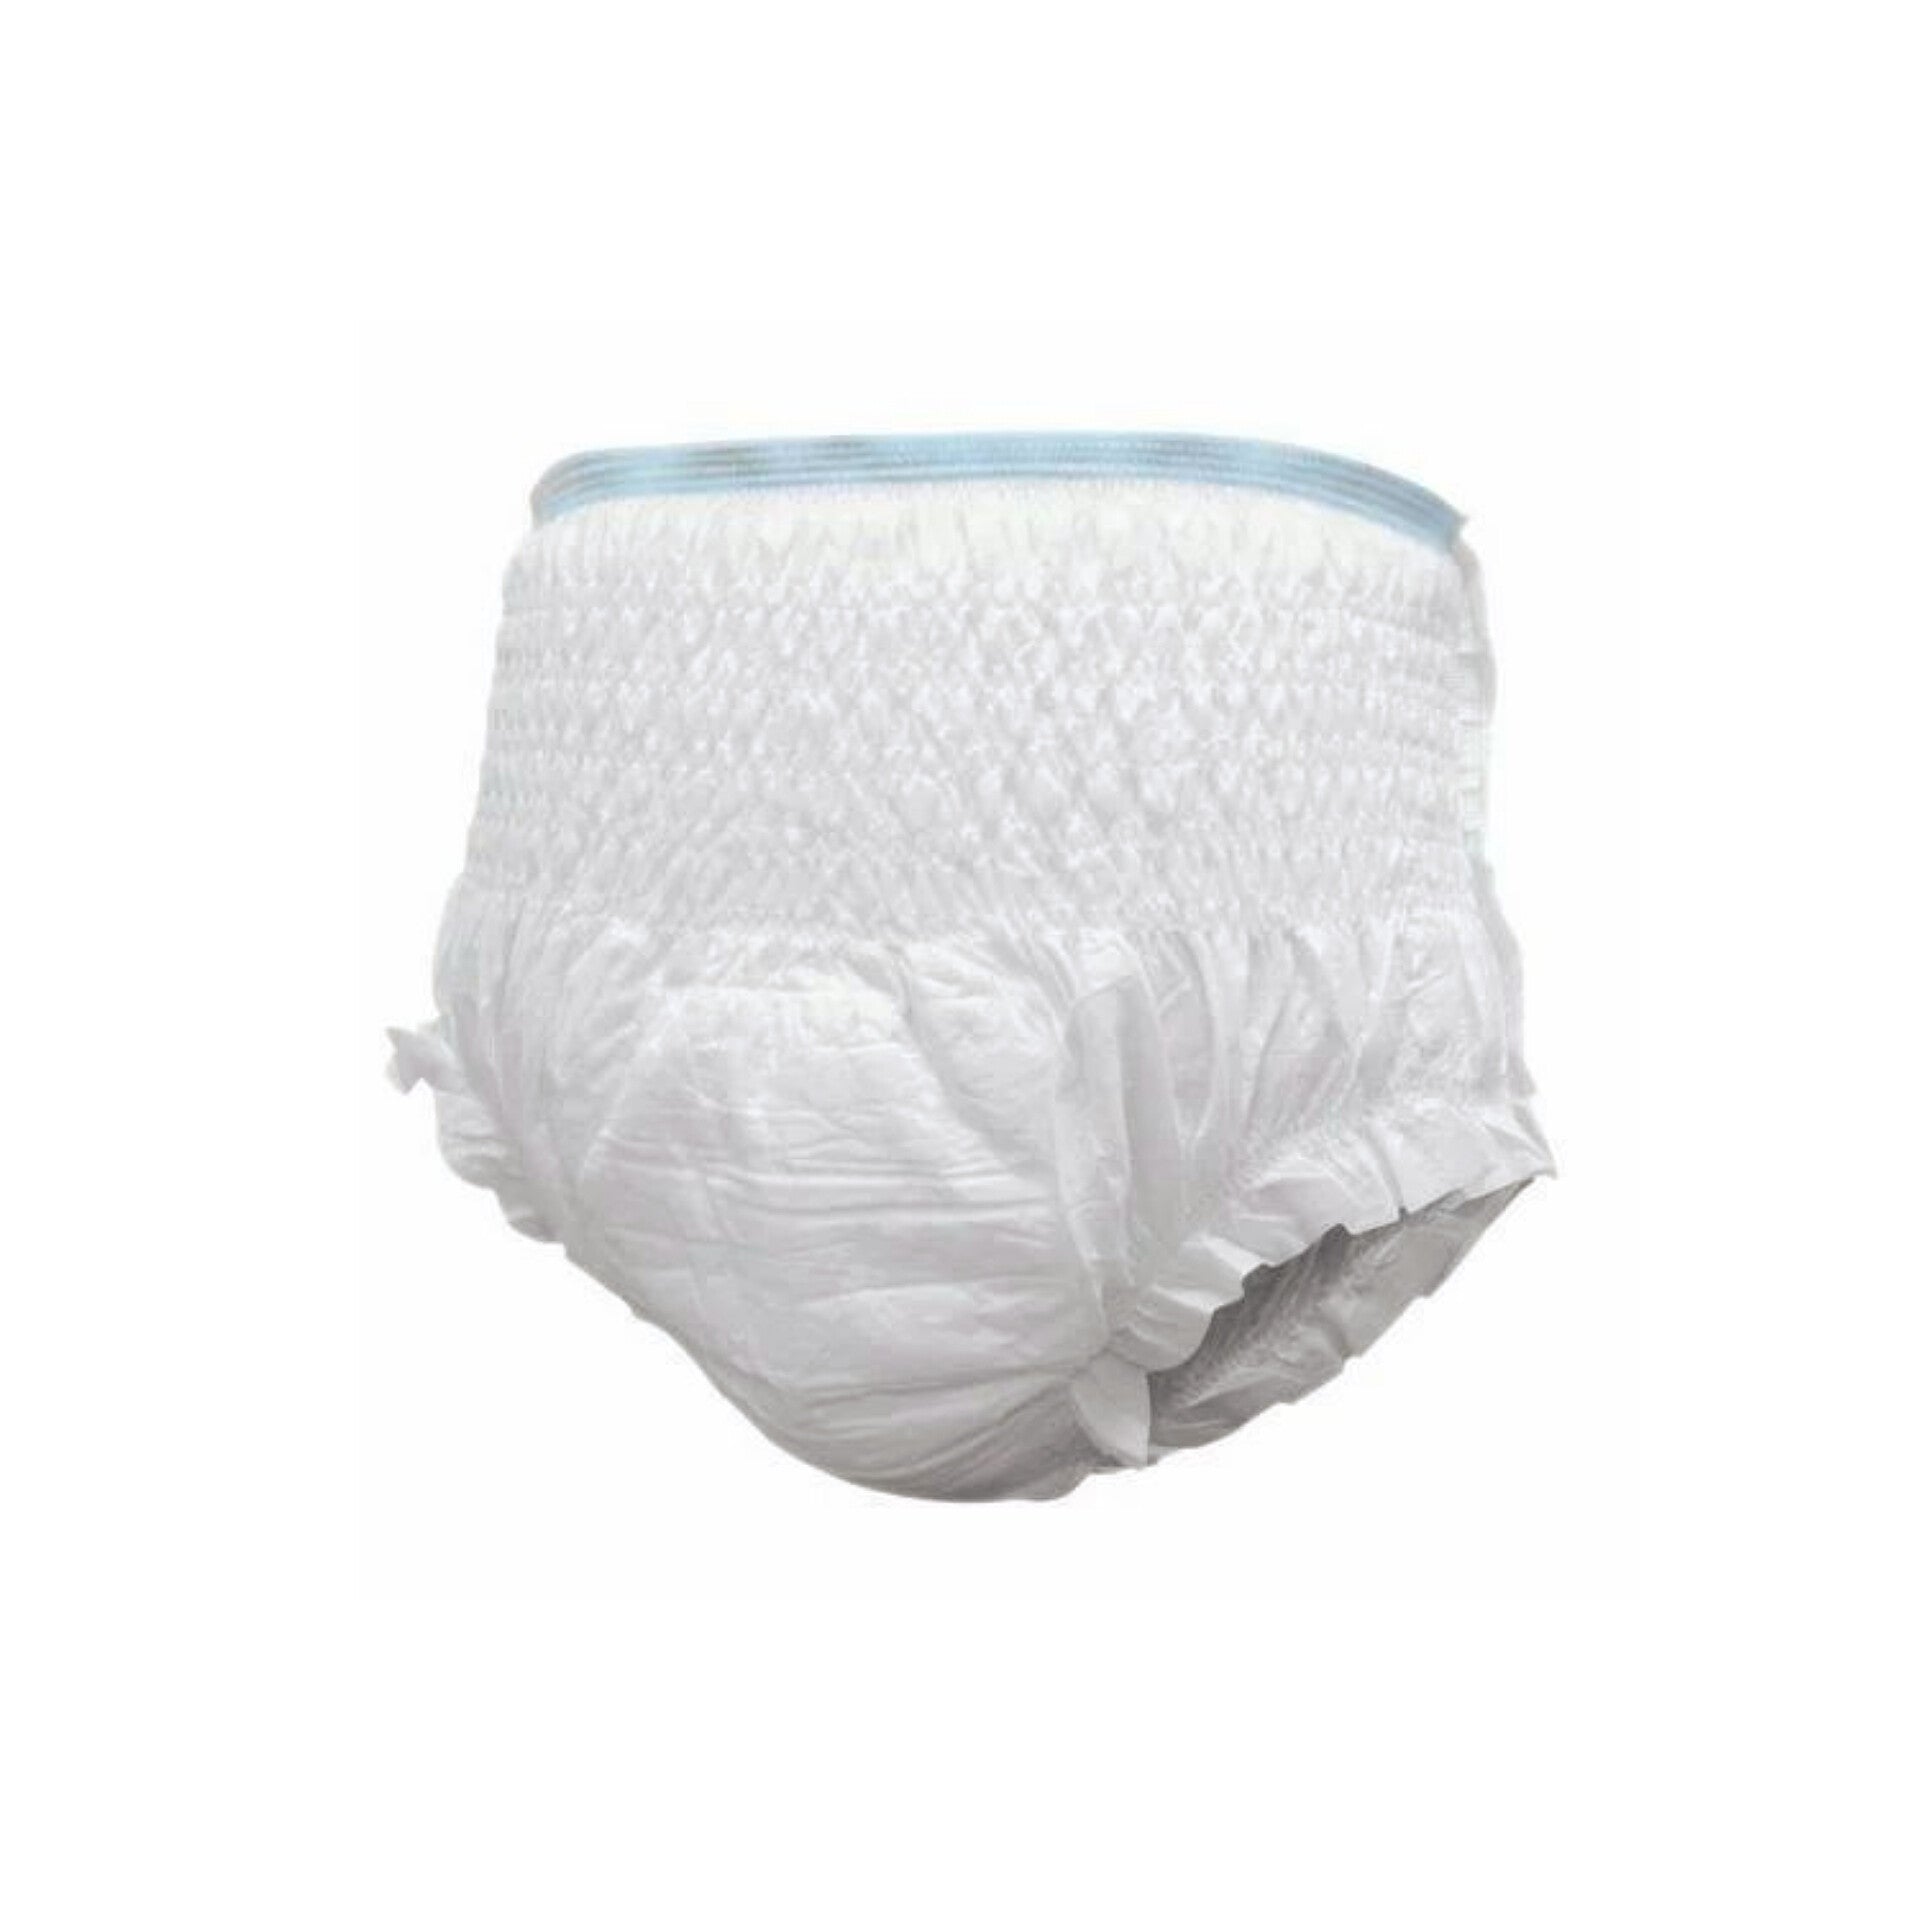 Euromix Pullup Nappy Pants Size 6 - Diaper Yard Gh